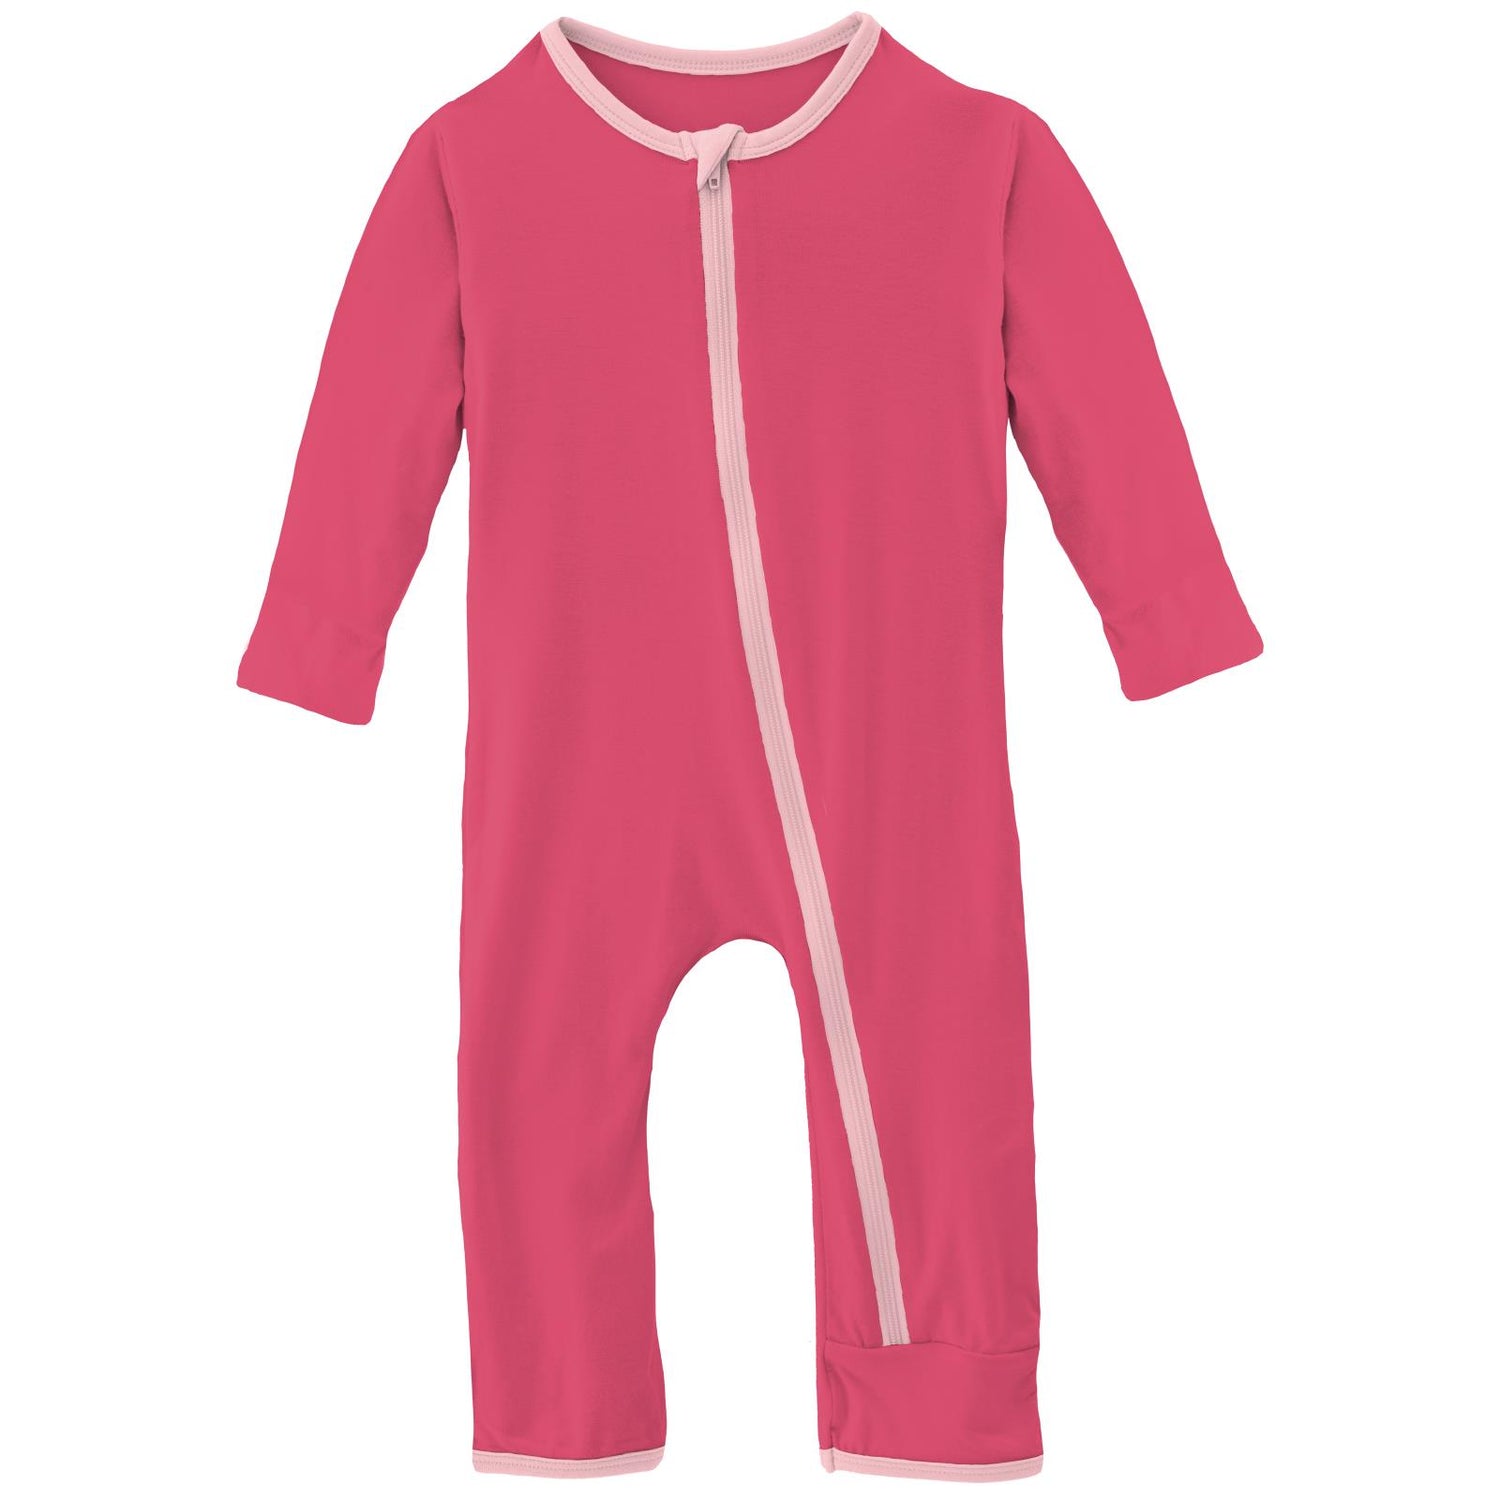 Applique Coverall with Zipper in Winter Rose Penguin